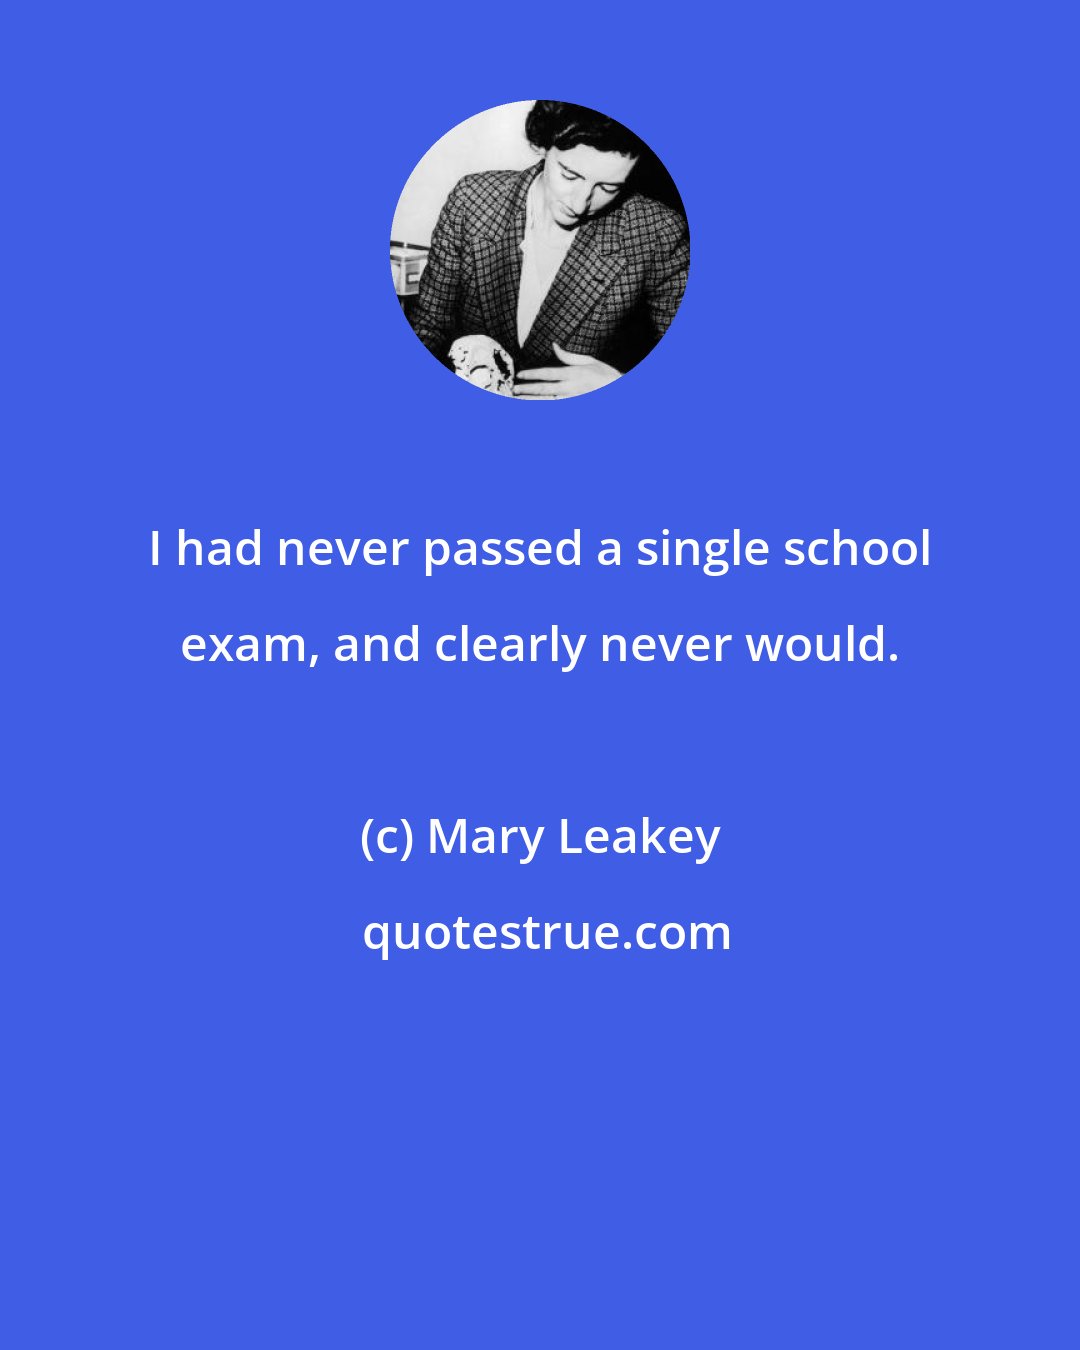 Mary Leakey: I had never passed a single school exam, and clearly never would.